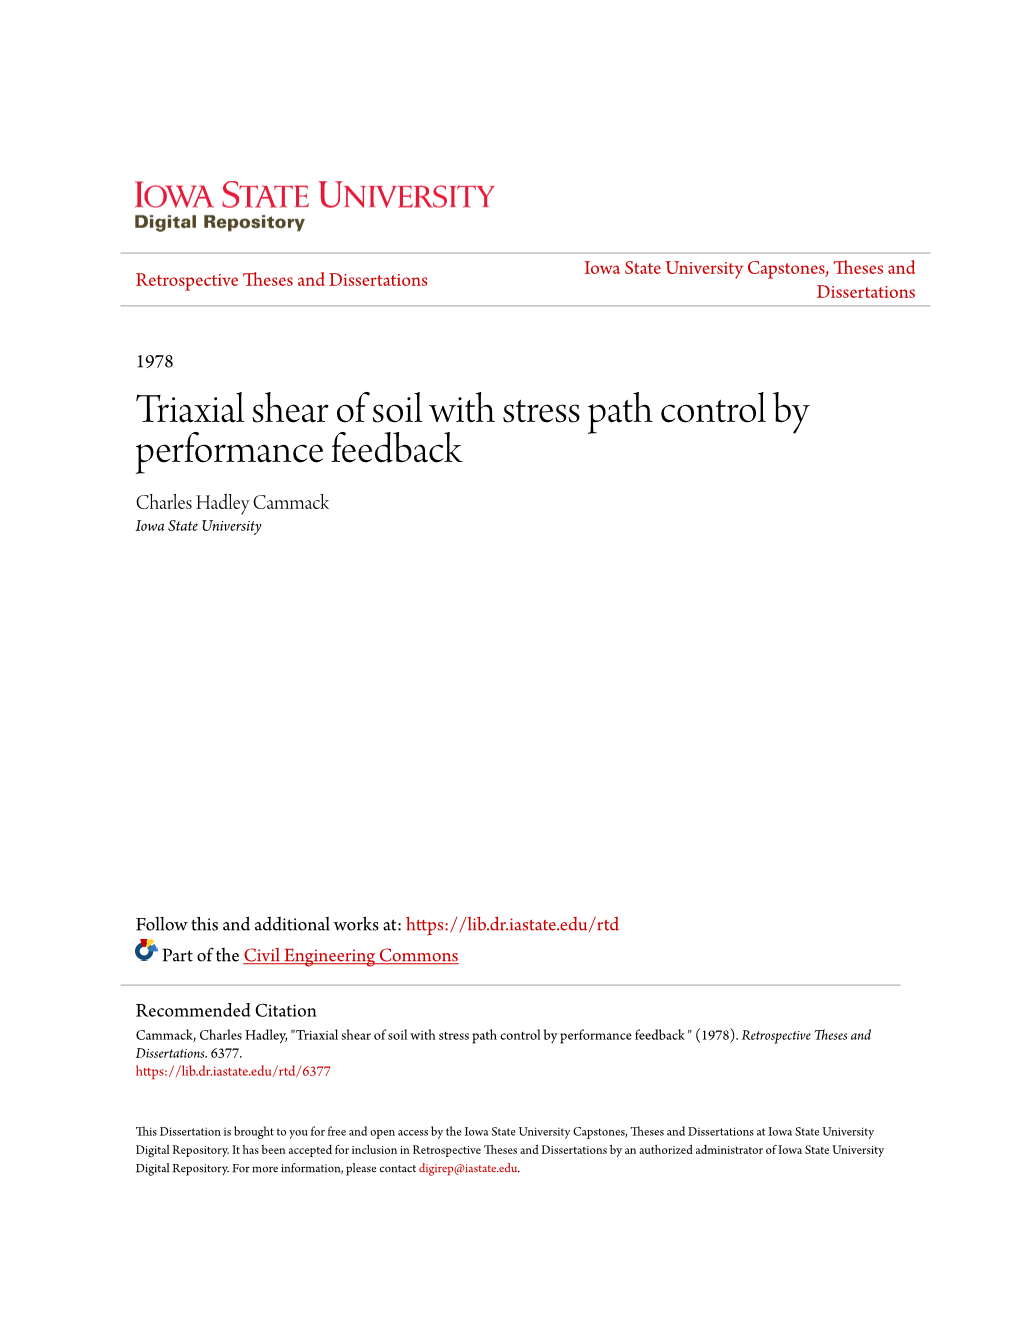 Triaxial Shear of Soil with Stress Path Control by Performance Feedback Charles Hadley Cammack Iowa State University